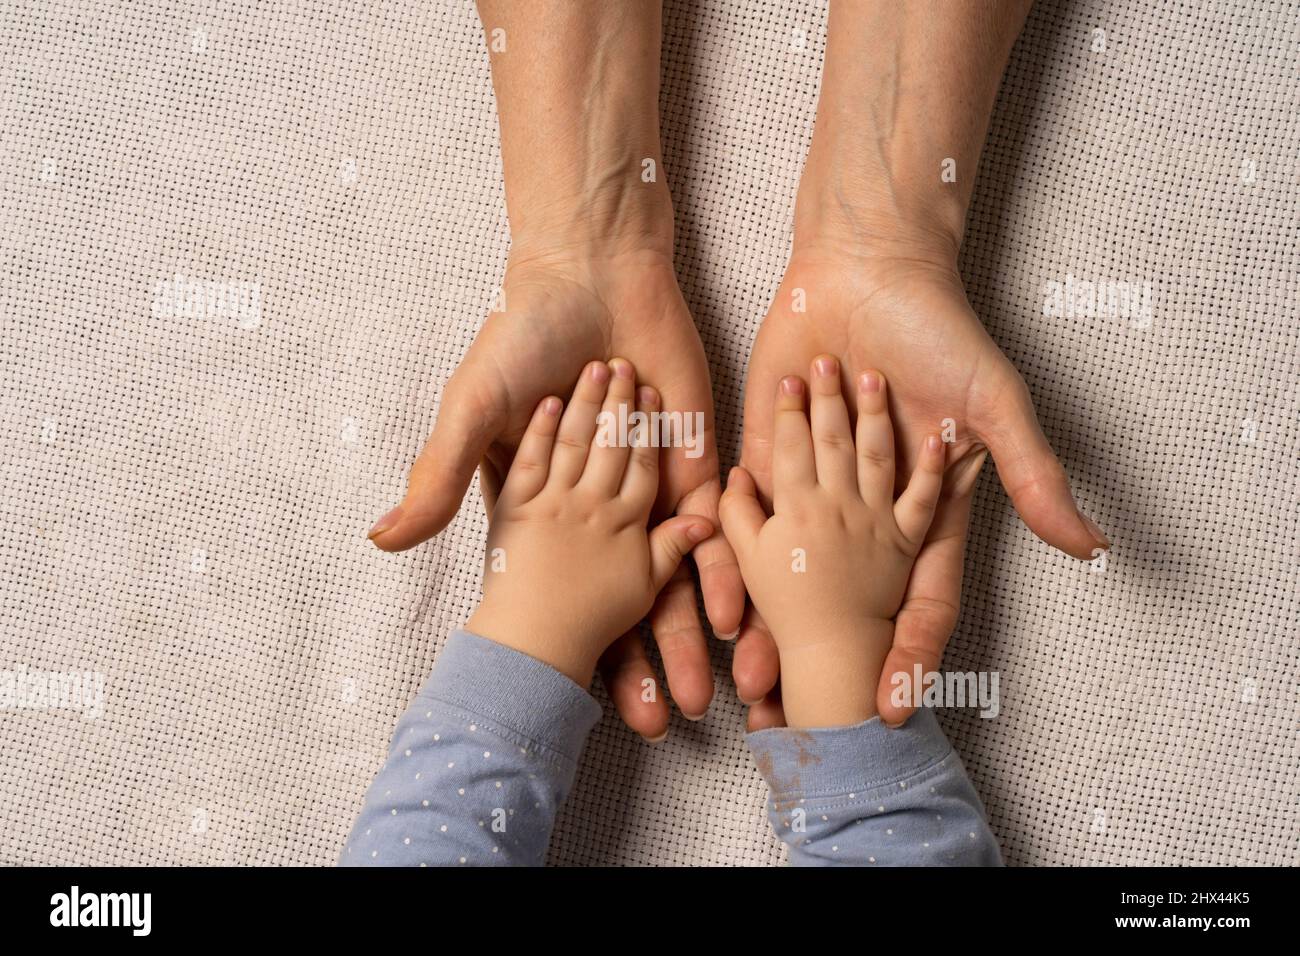 Grandma's hands are holding baby's hands. Concept taking care of the baby , soft skin, great-grandmother and great-grandson. Stock Photo